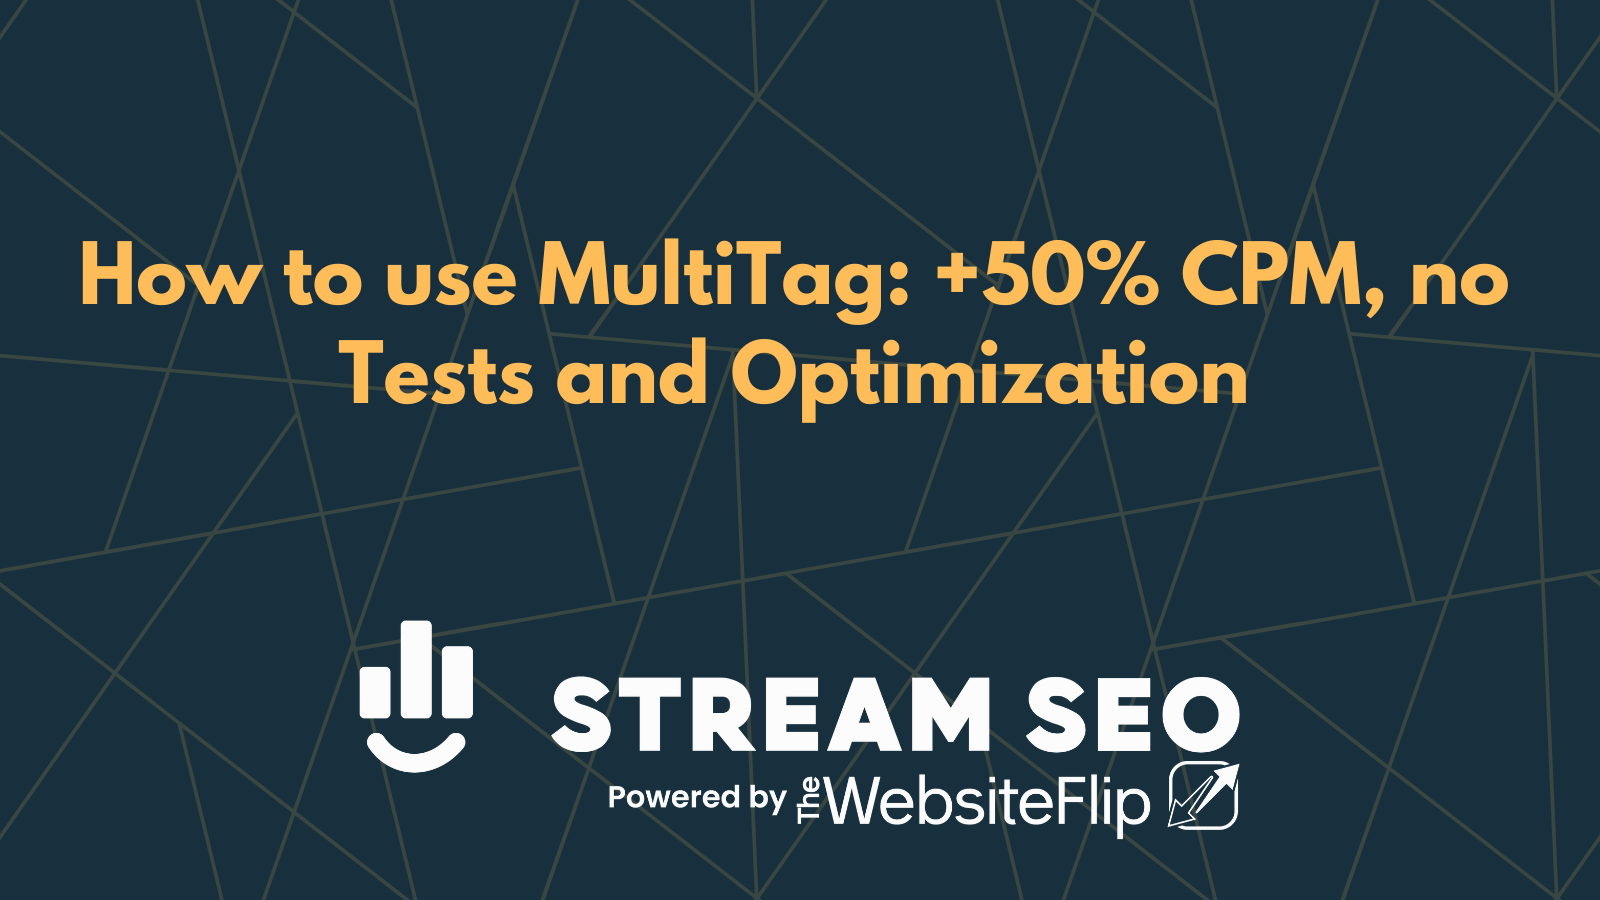 How To Use MultiTag: +50% CPM, No Tests and Optimization